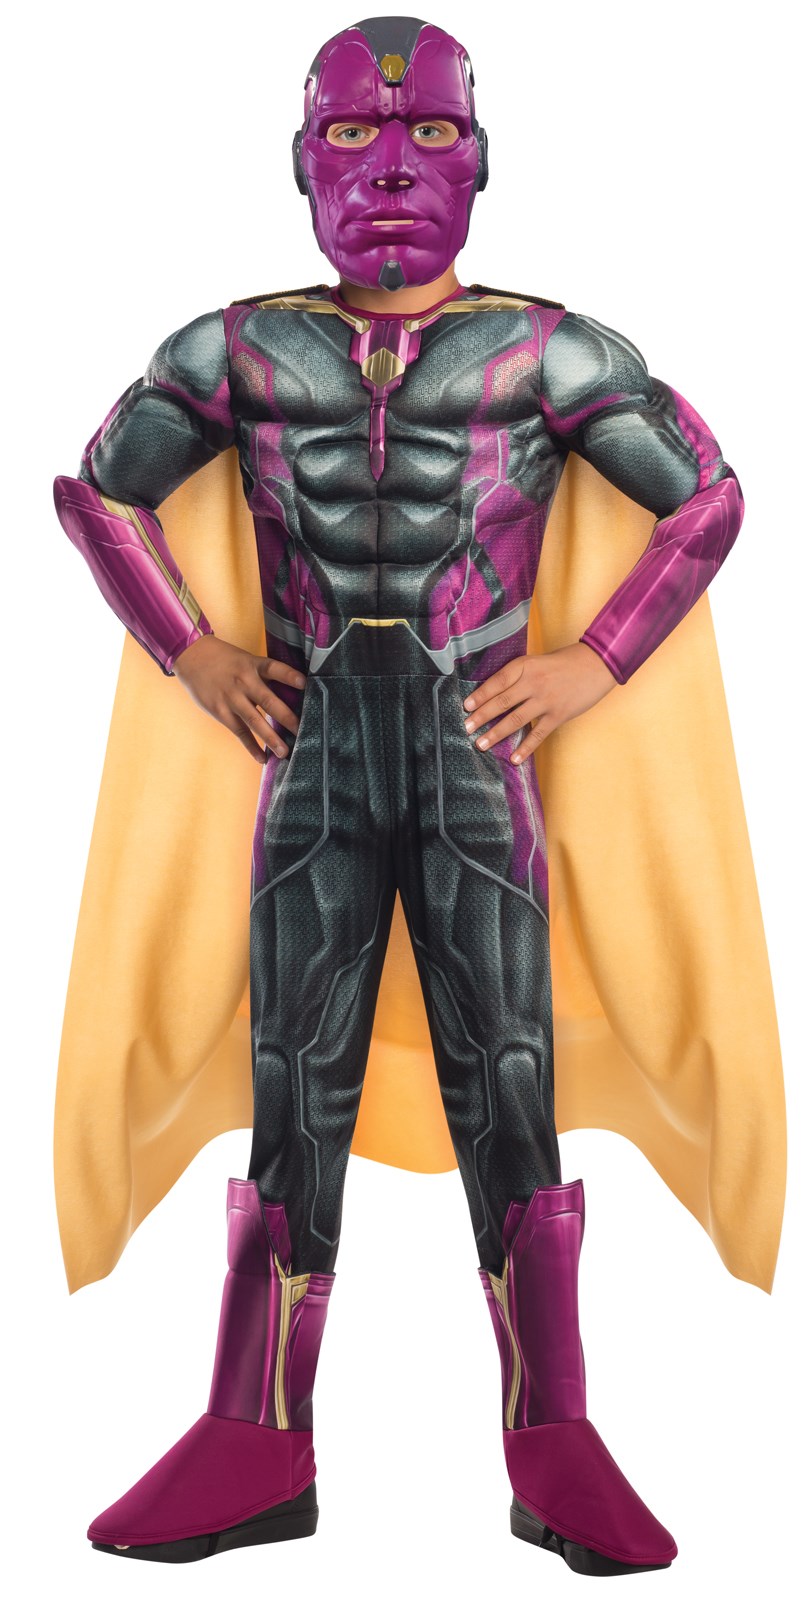 Avengers 2 - Age of Ultron: Deluxe Vision Costume For Kids